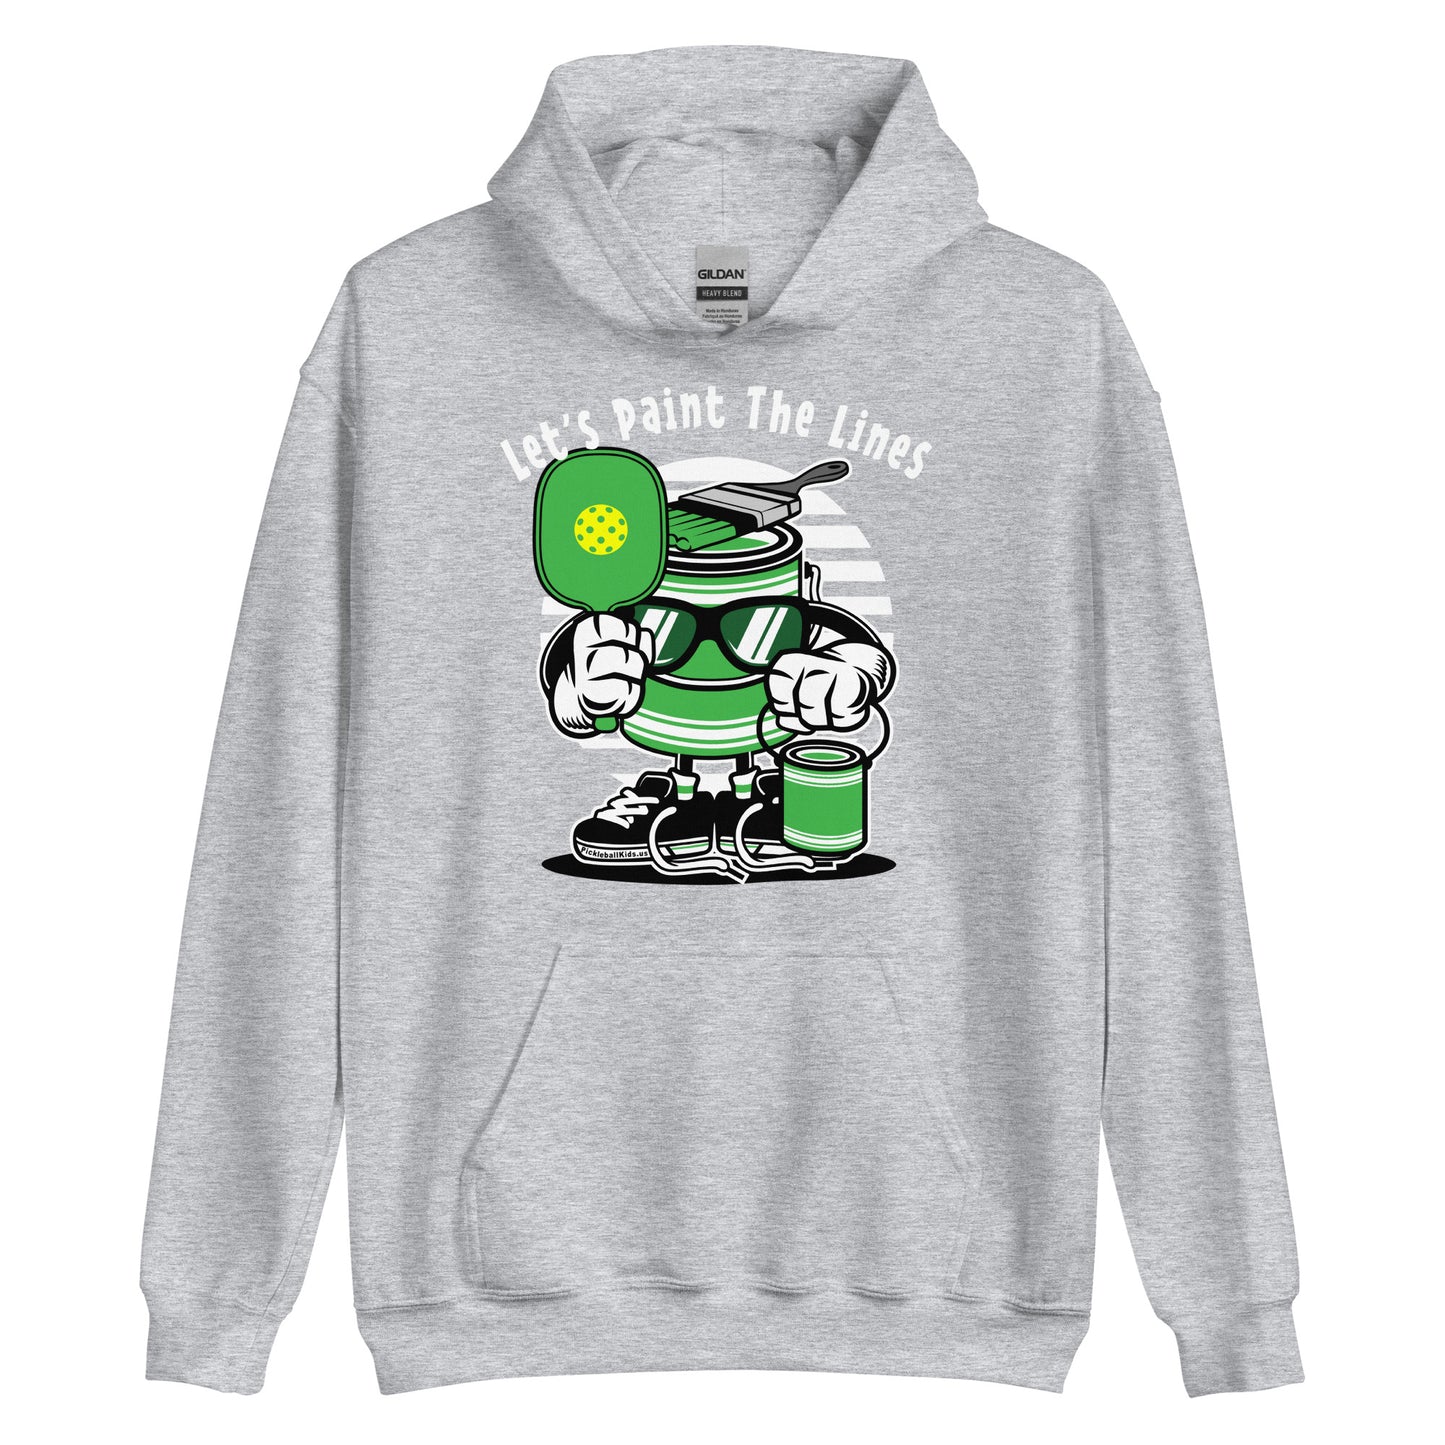 Fun Pickleball Retro-Vintage Unisex Hoodie, "Let's Paint The Line", Can And Brush Holding Paddle